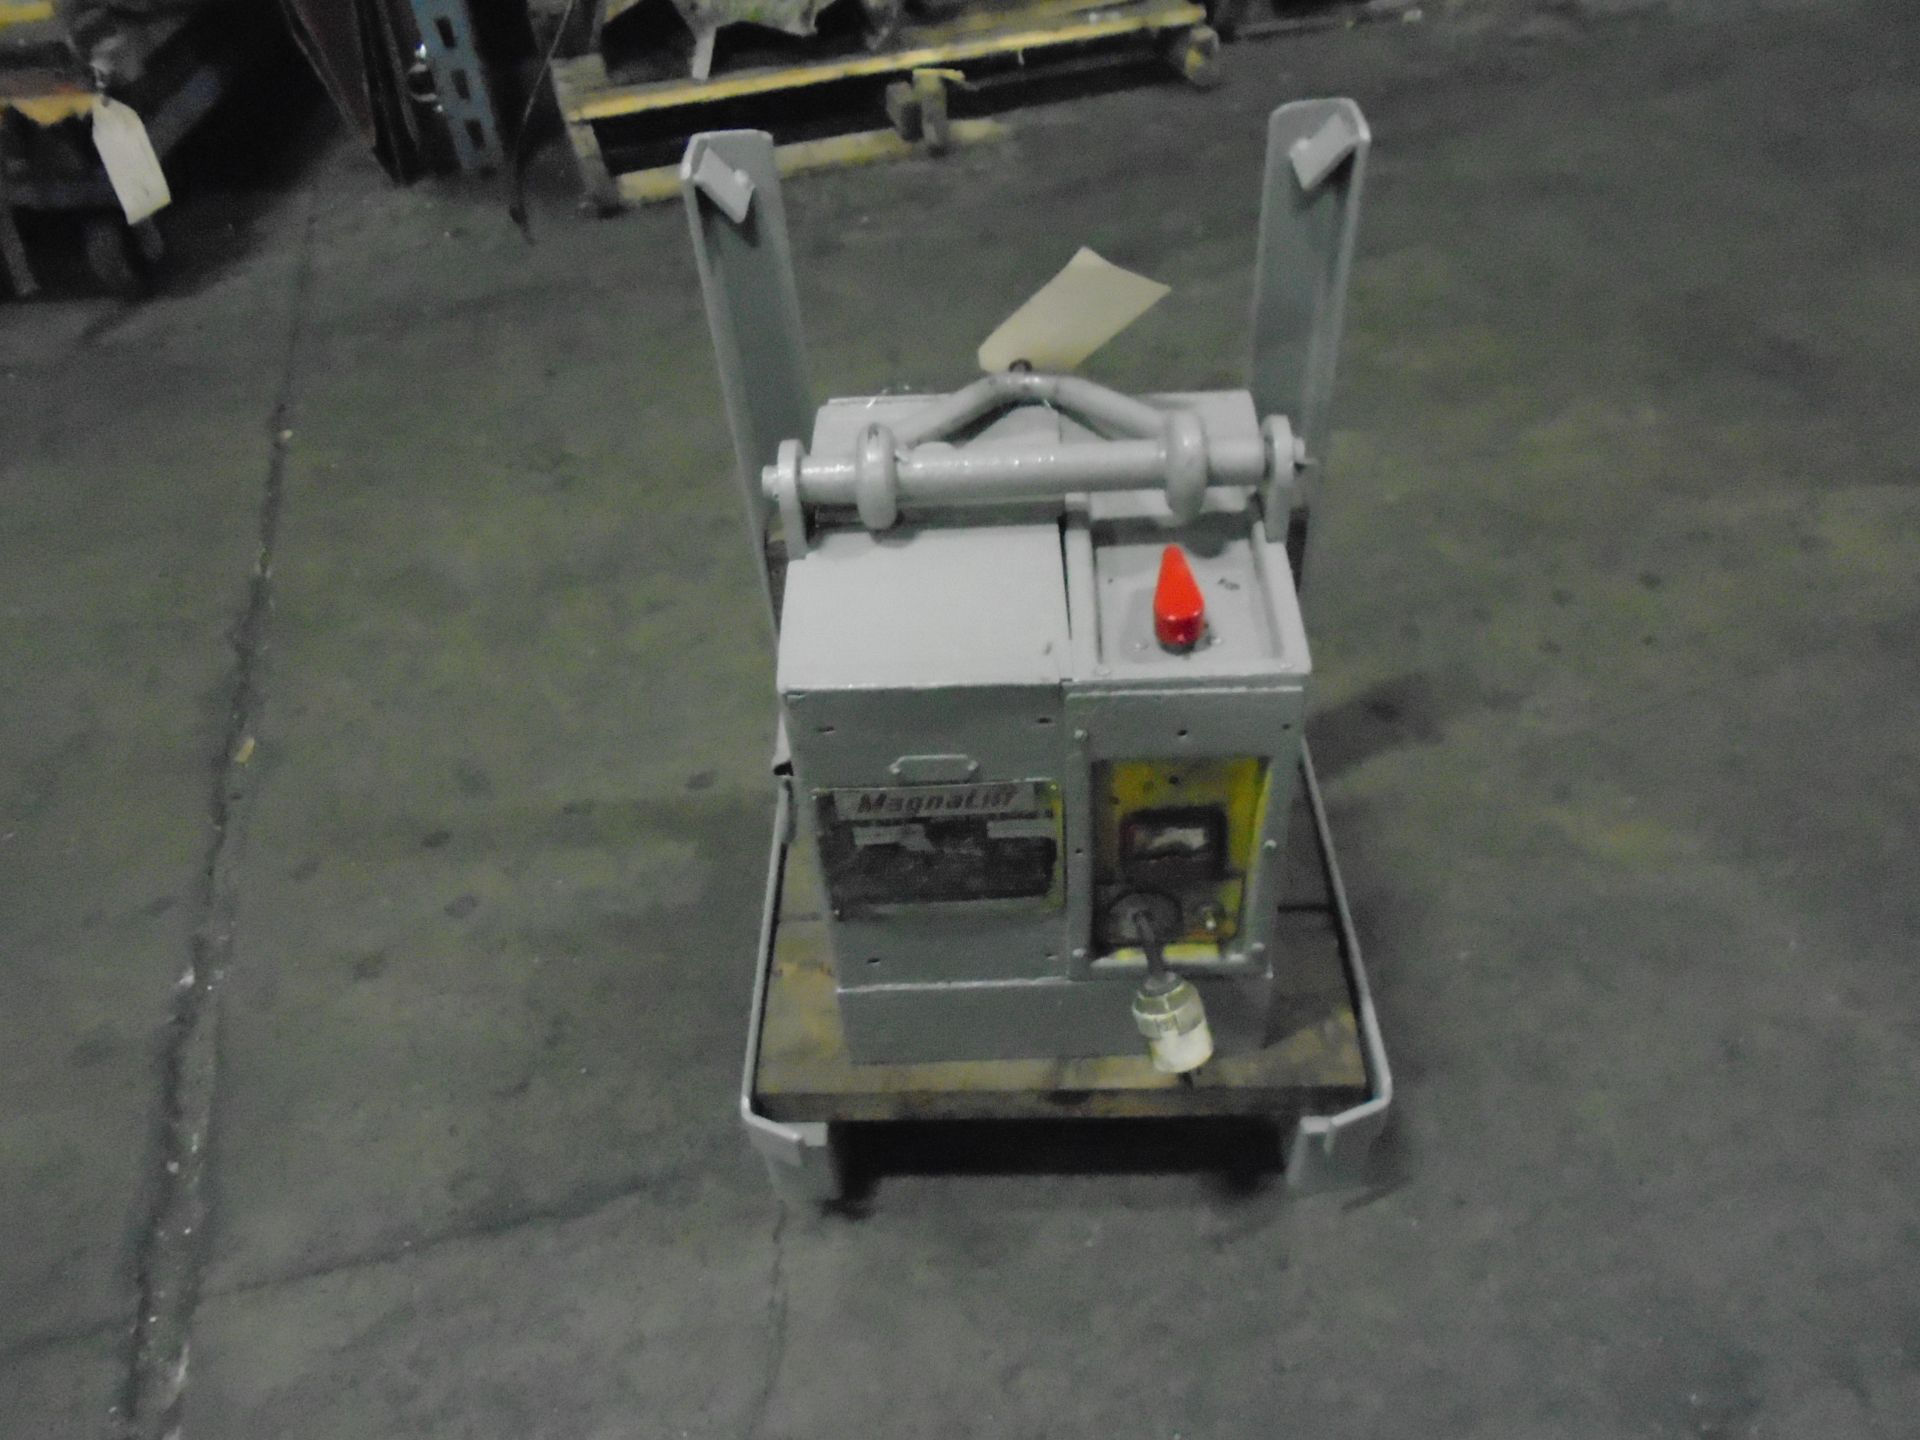 Magnaligt LM-2 Crane Electromagnet 2,500 Lbs. Capacity With Charger 110V Brand New Battery Stand